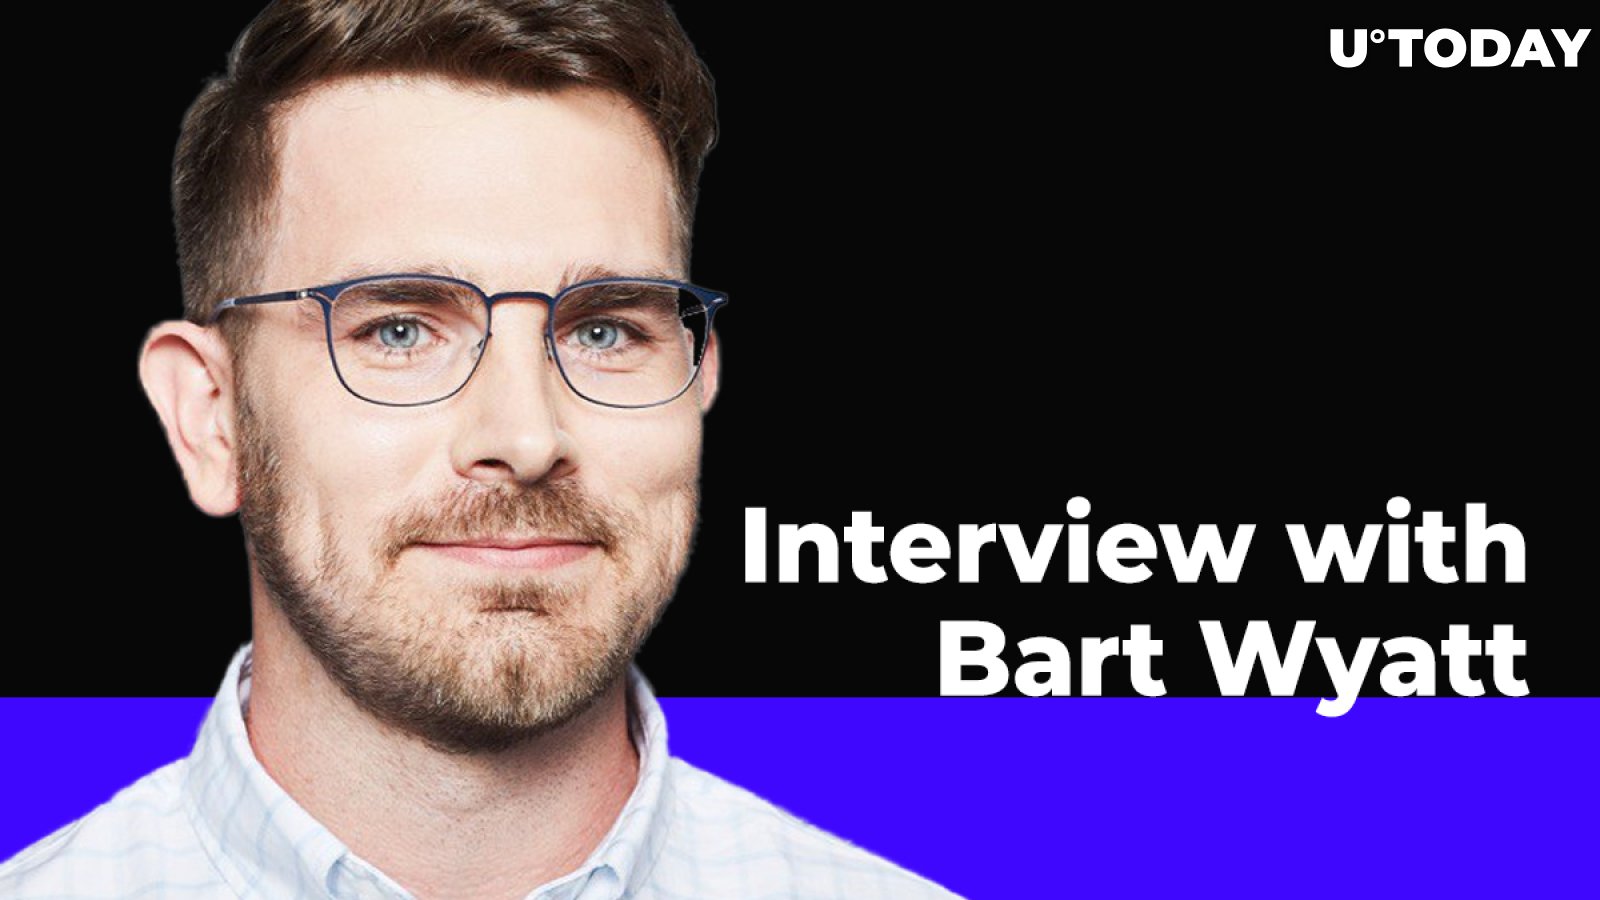 “When blockchain wins, we all win”: Interview with Block.one’s Bart Wyatt on Telos, EOSIO and Ethereum